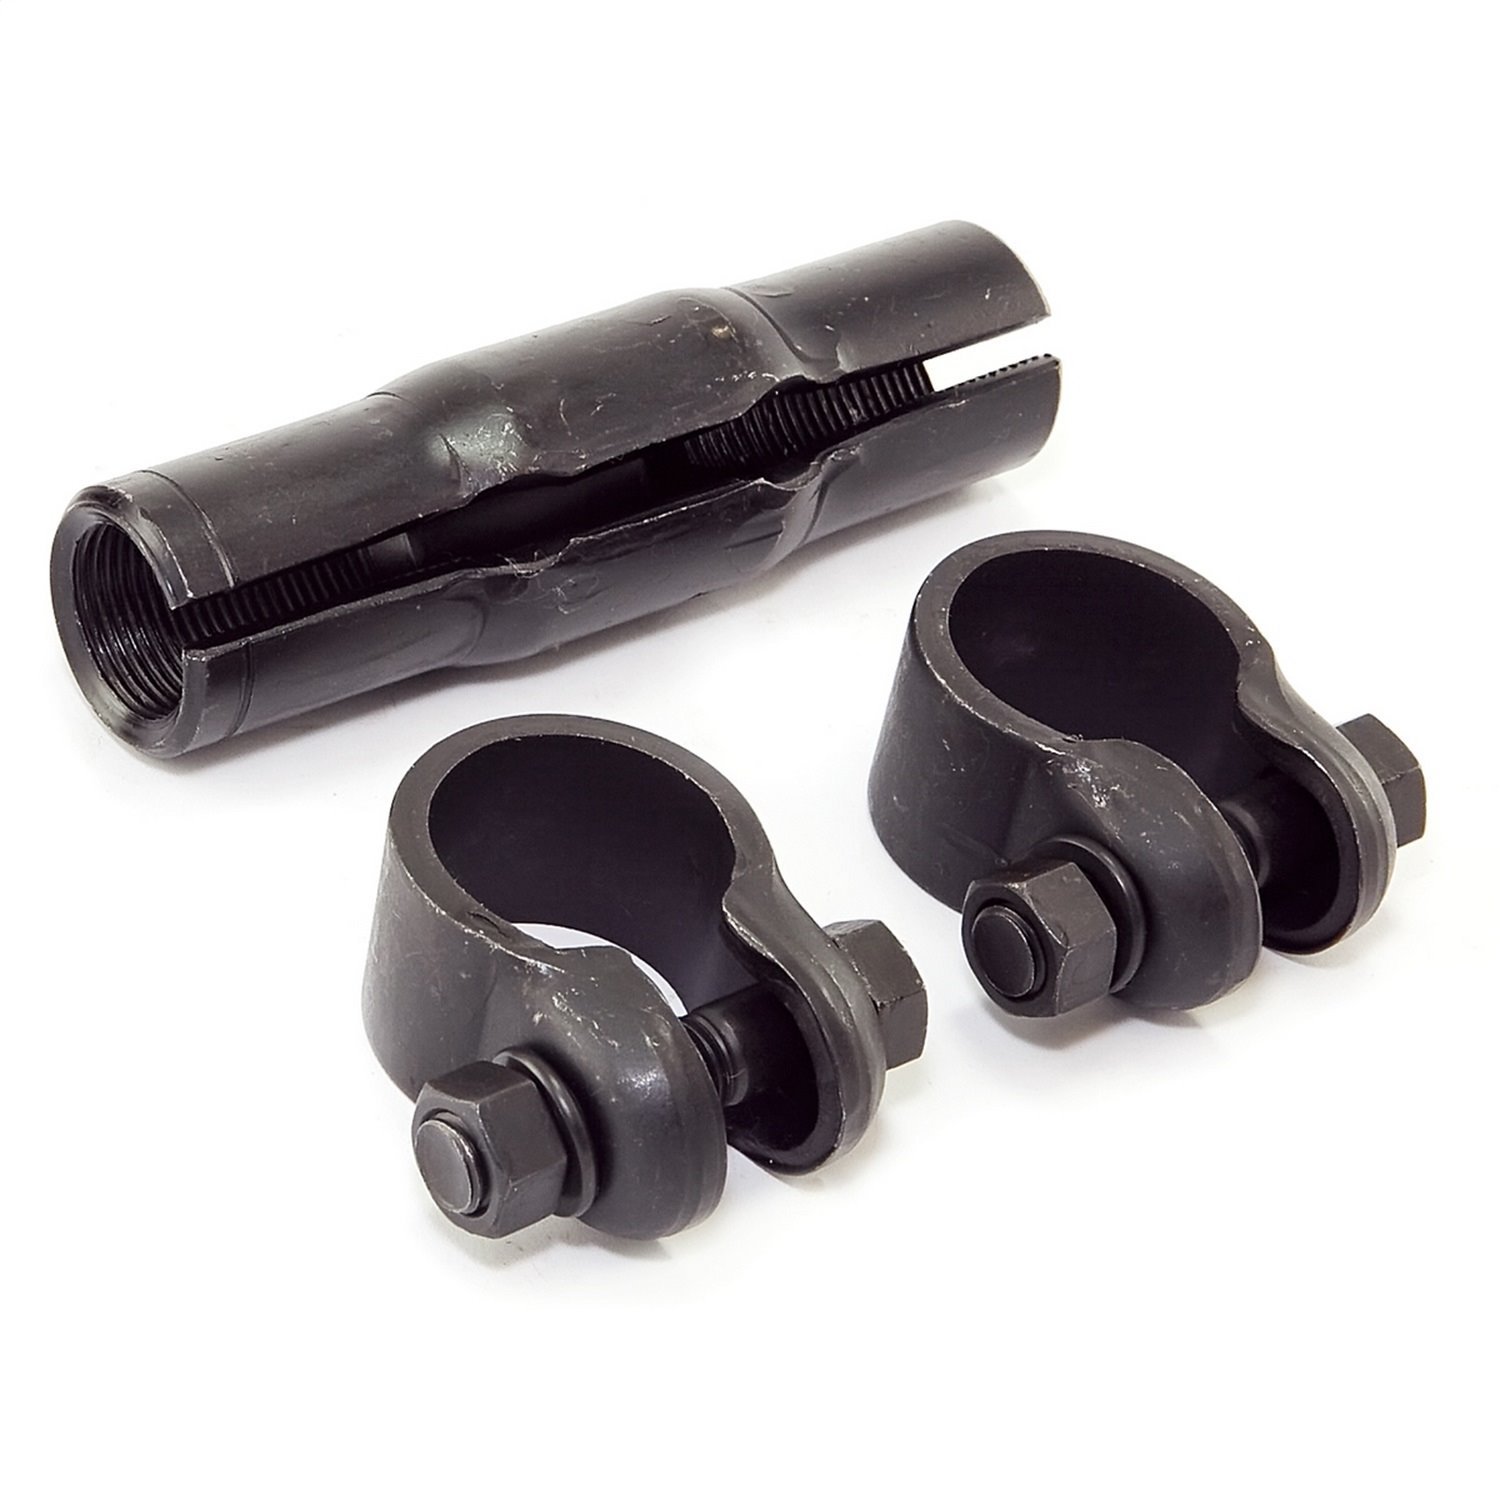 Replacement tie rod adjustment sleeve from Omix-ADA, Fits 87-95 Jeep Wrangler YJIncludes 2 clamps.